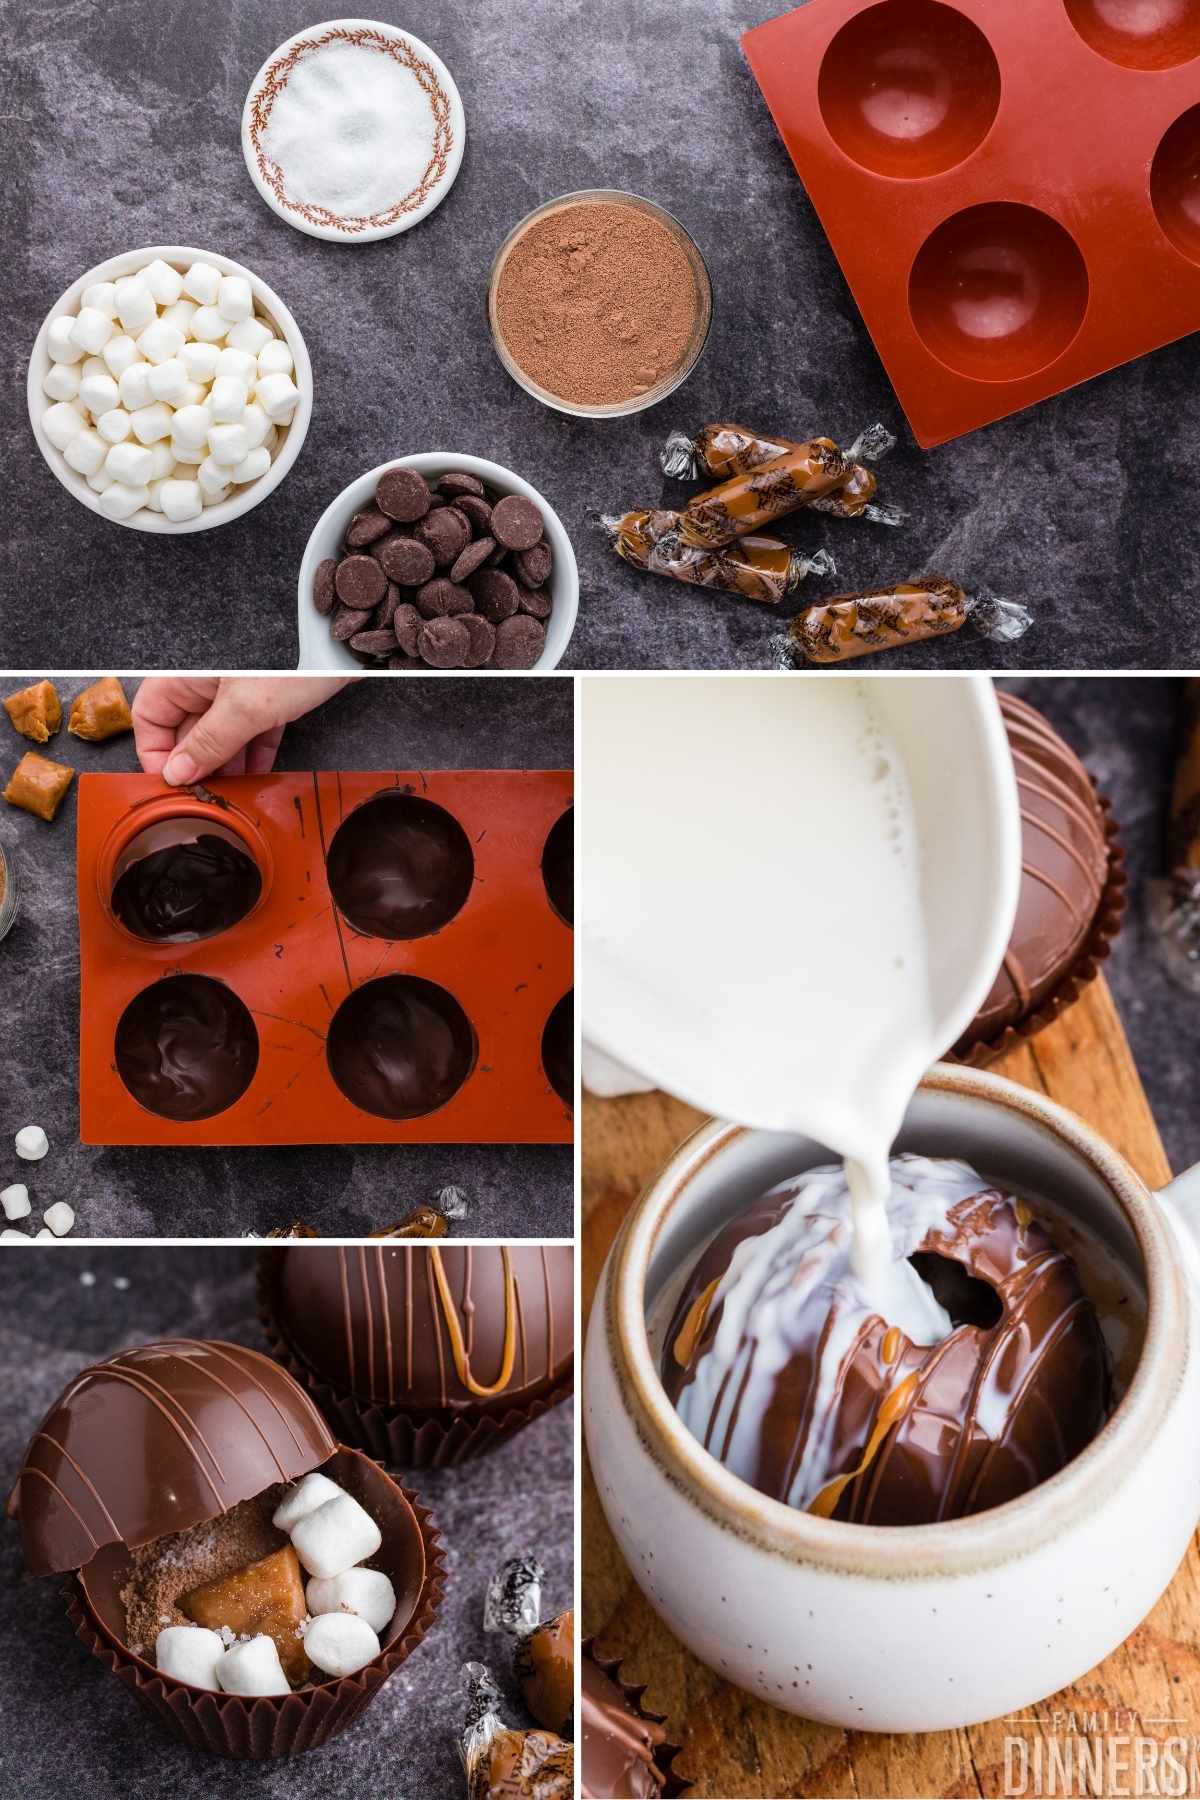 collage of the process of making DIY hot chocolate bombs recipe. Top image of ingredients (marshmallows, chocolate pieces, sea salt, cocoa mix and caramel). Second image of red silicone hot chocolate bomb mold with chocolate bombs being pulled out. Third image of fillings inside an open hot chocolate bomb. Final image of milk being poured over a hot cocoa bomb inside a white mug